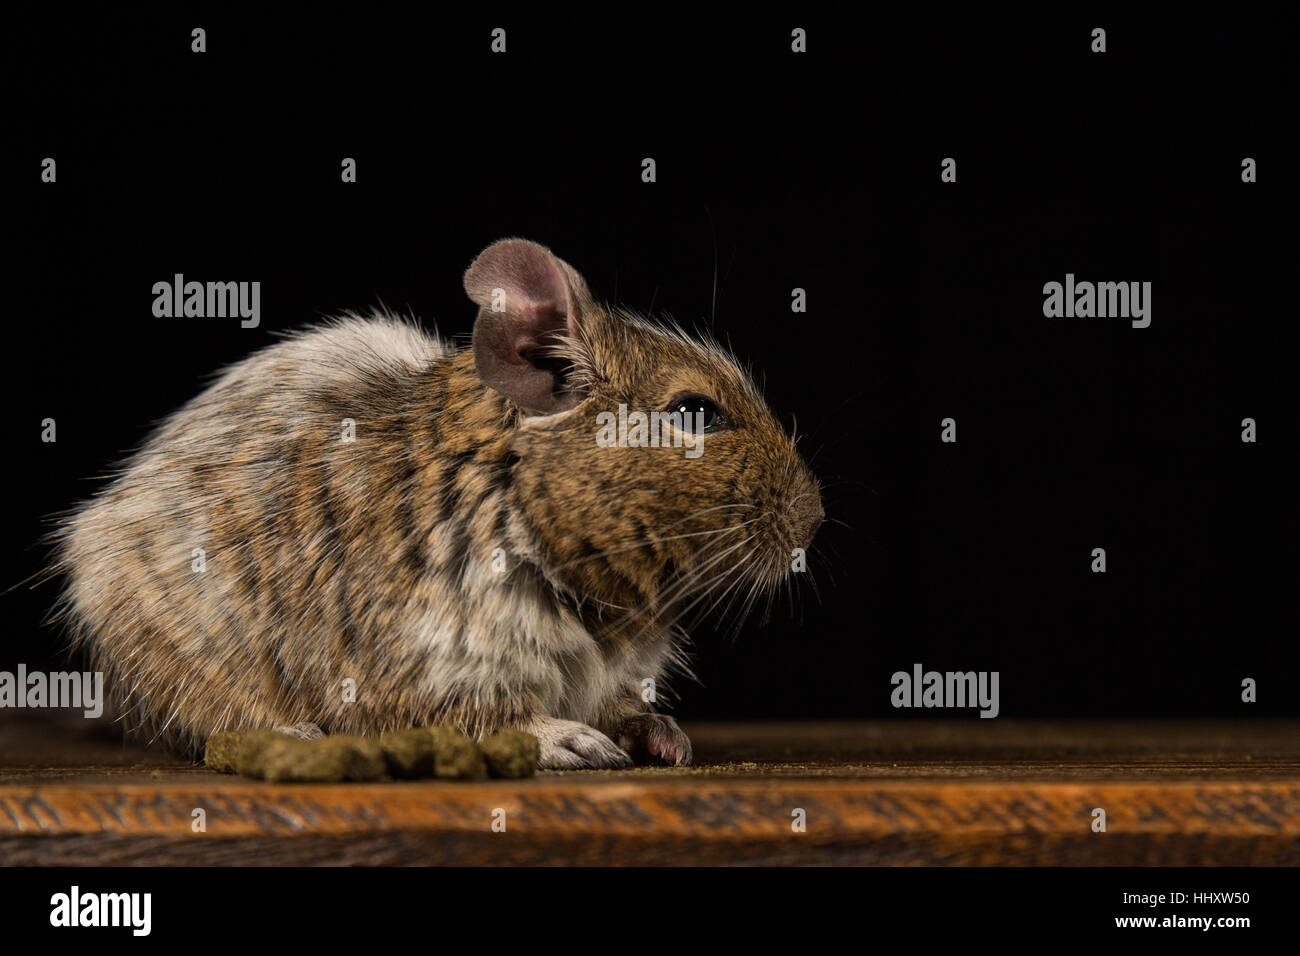 male degu sat on a wooden stool photographed in a studio against a black background Stock Photo